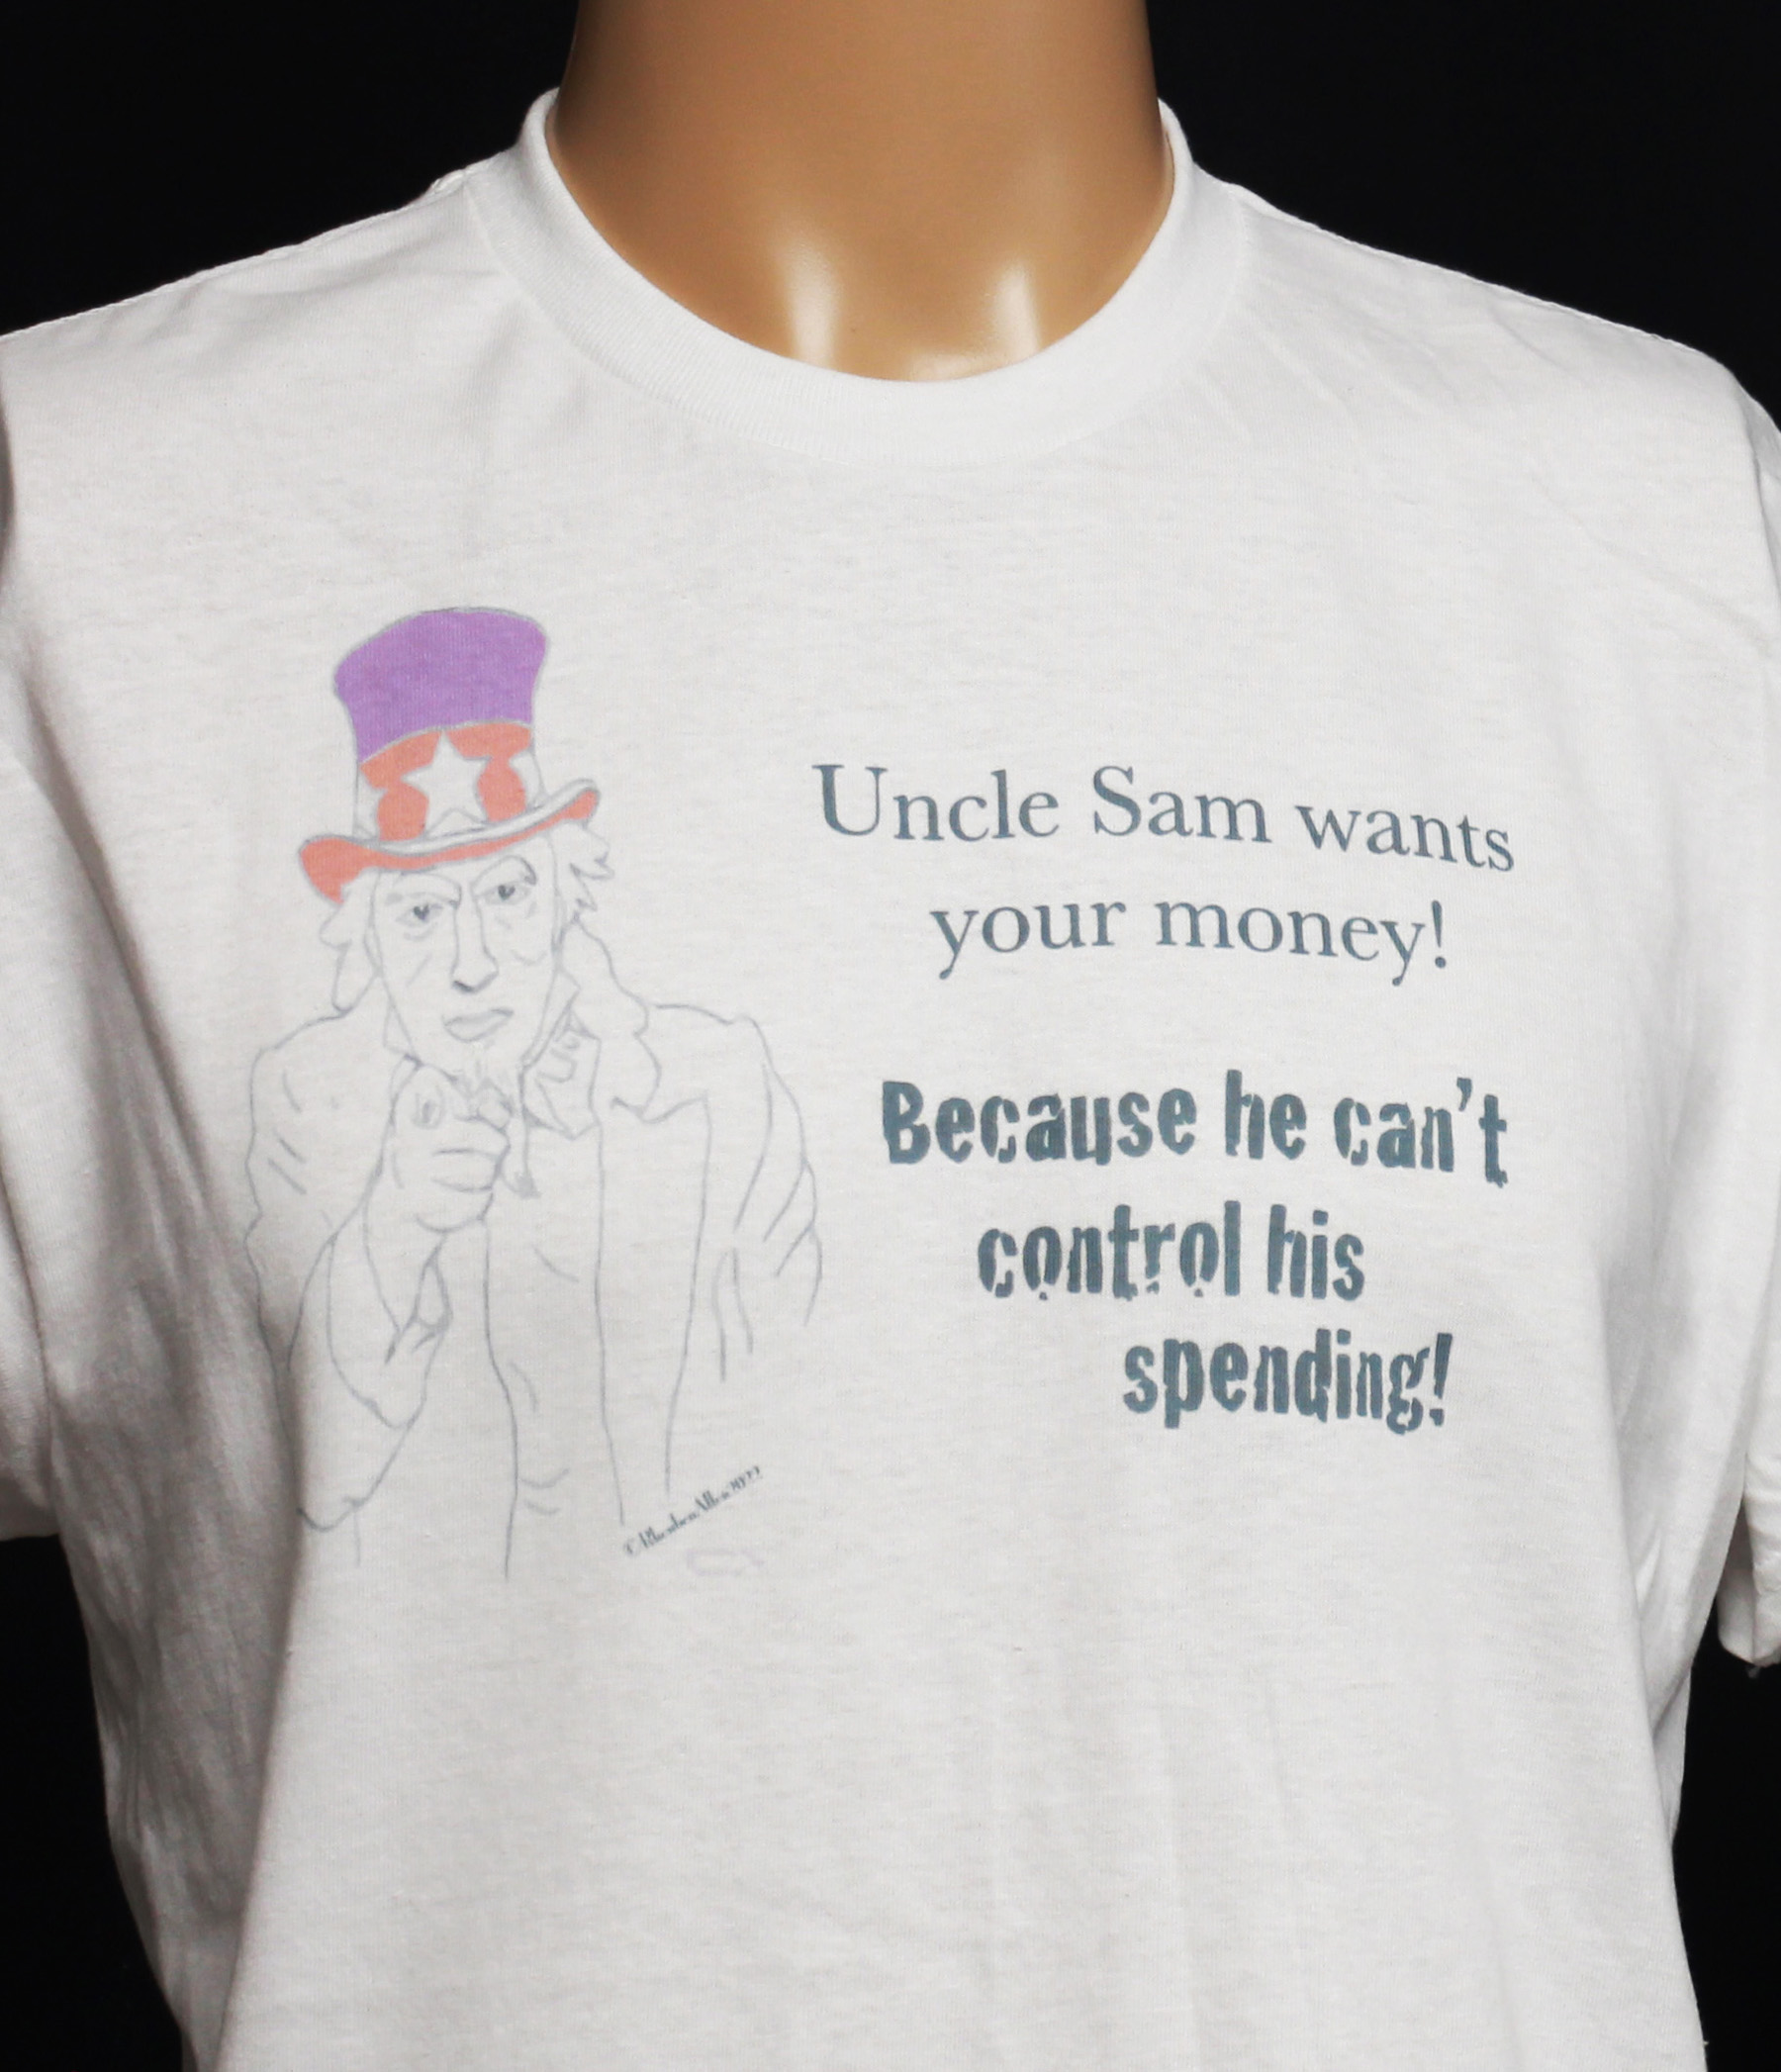 IUncle Sam wants your money because he can't control his spending